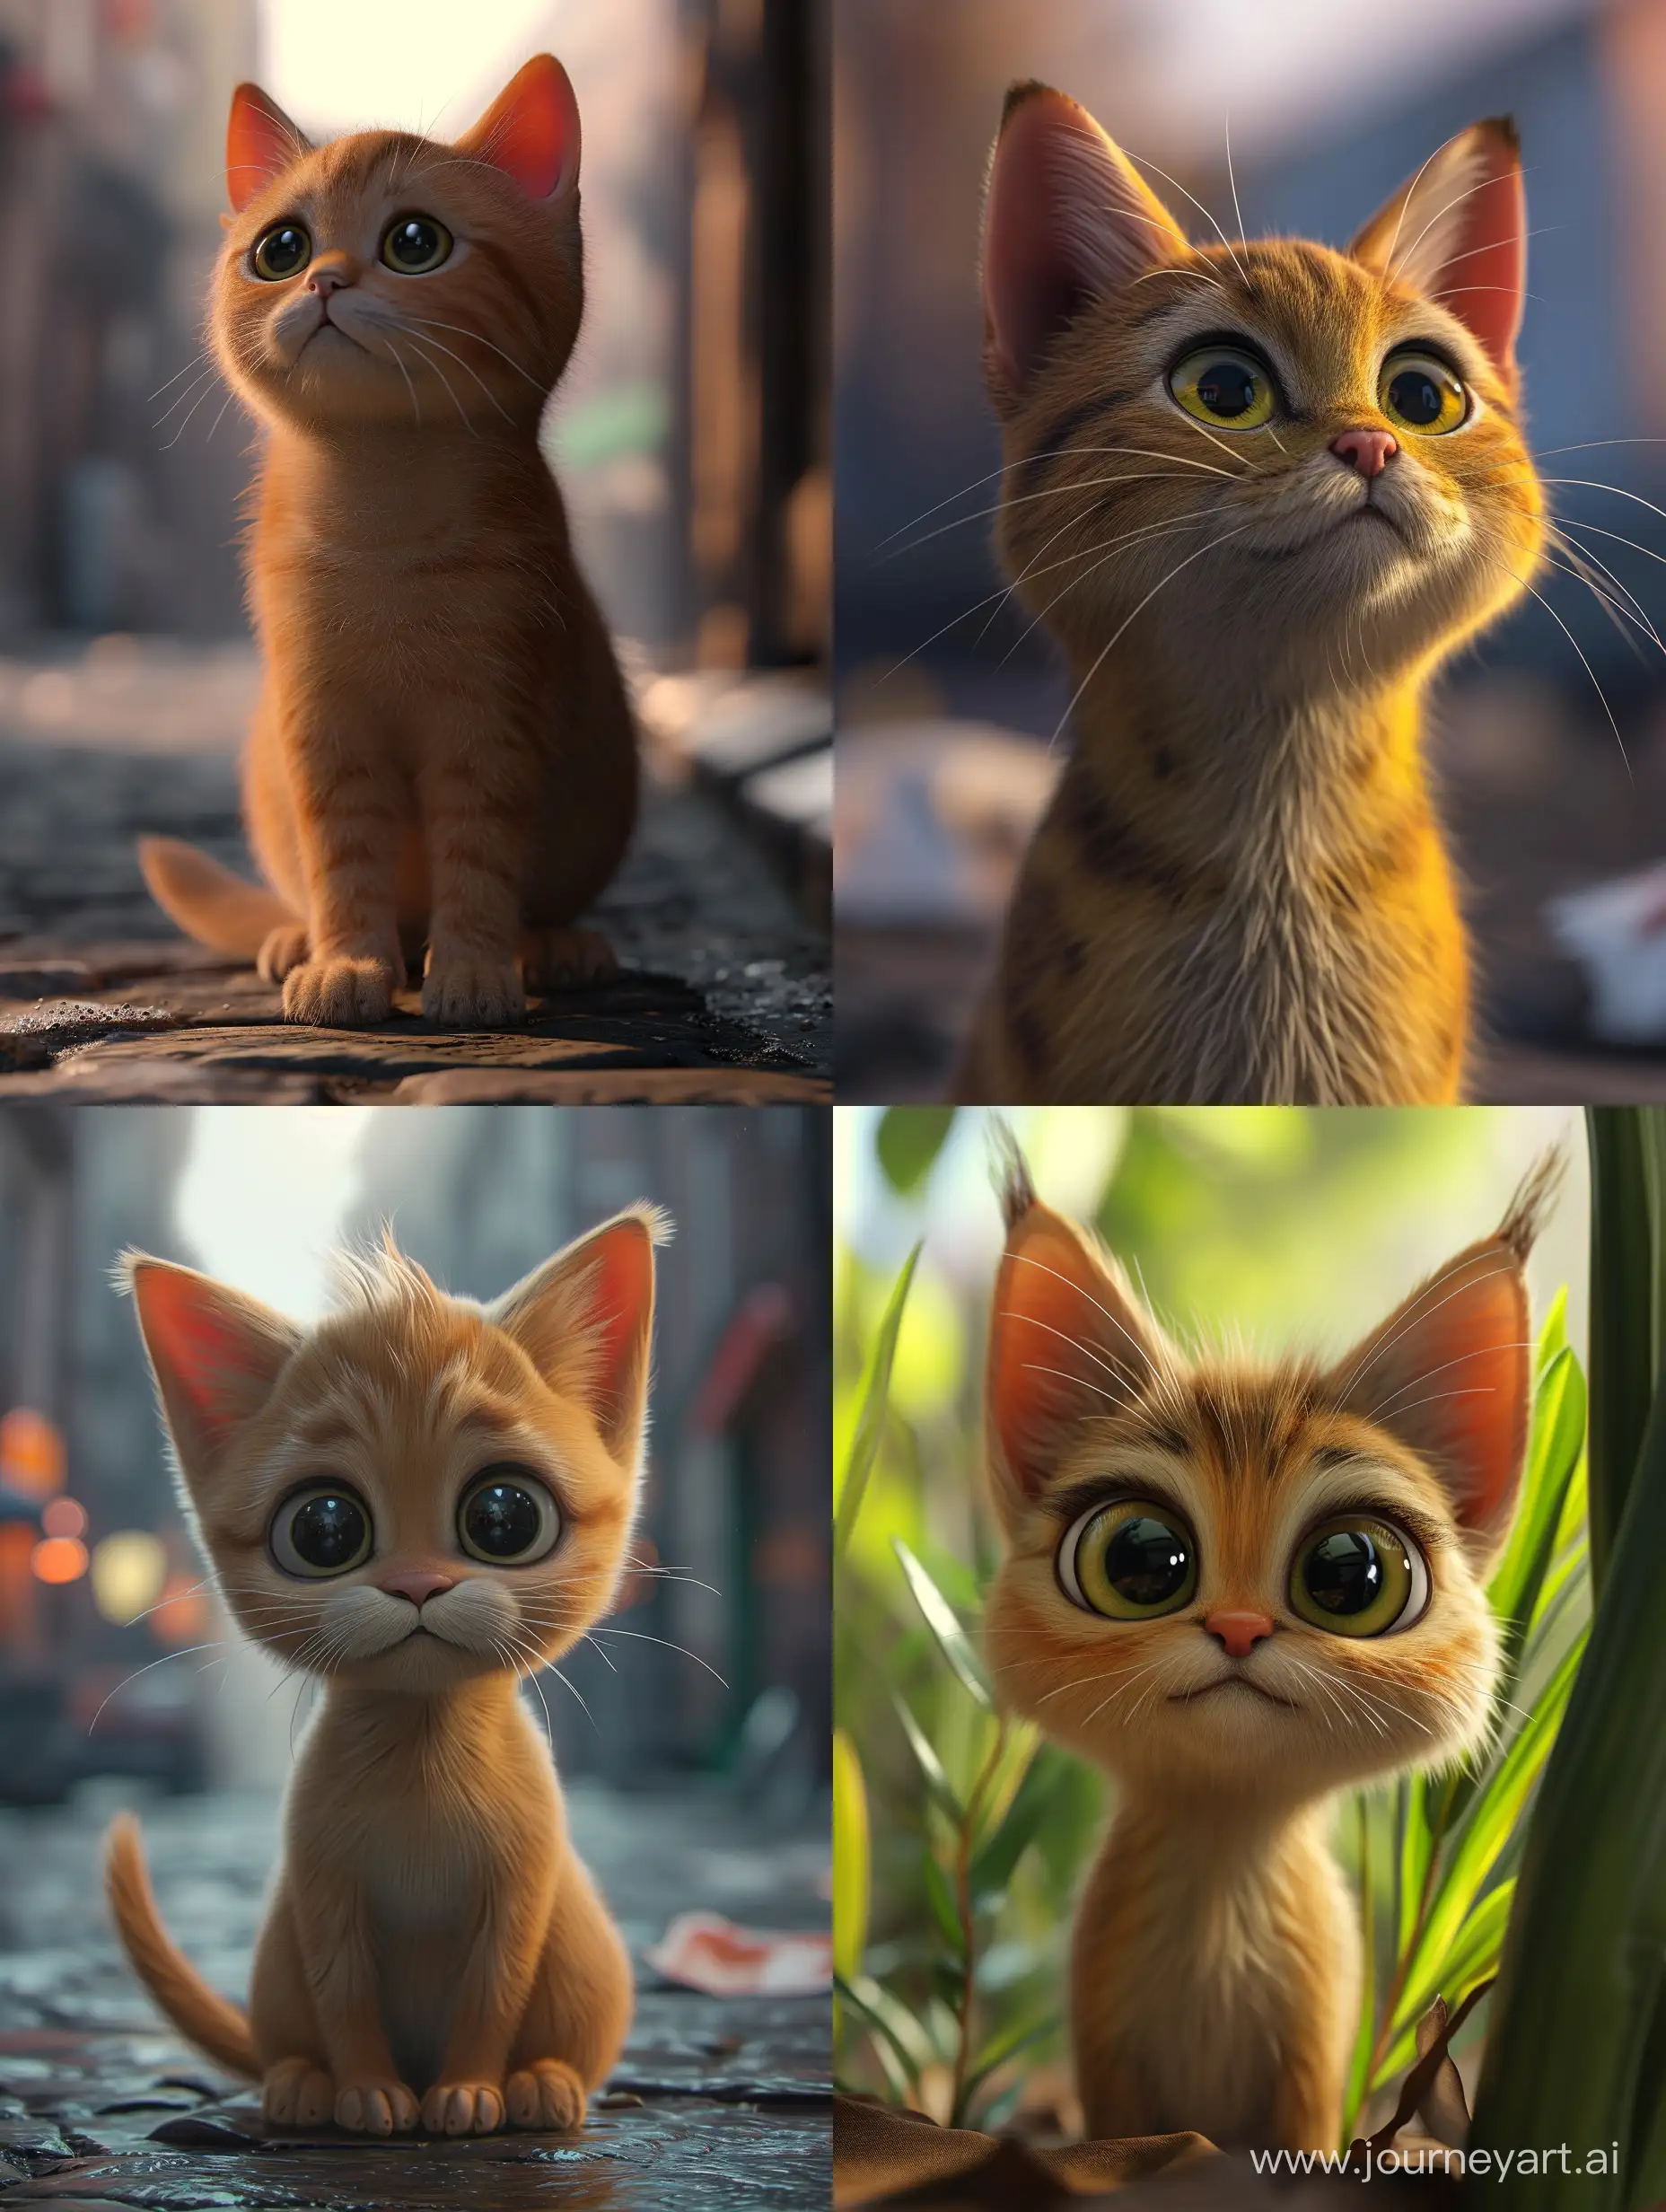 a cute cat  in the style on Jean-Baptiste monge and Pixar, Daz3d, In the style of hyperrealistic landscapes, charming character illustrations,  cinematic lighting, street style realism